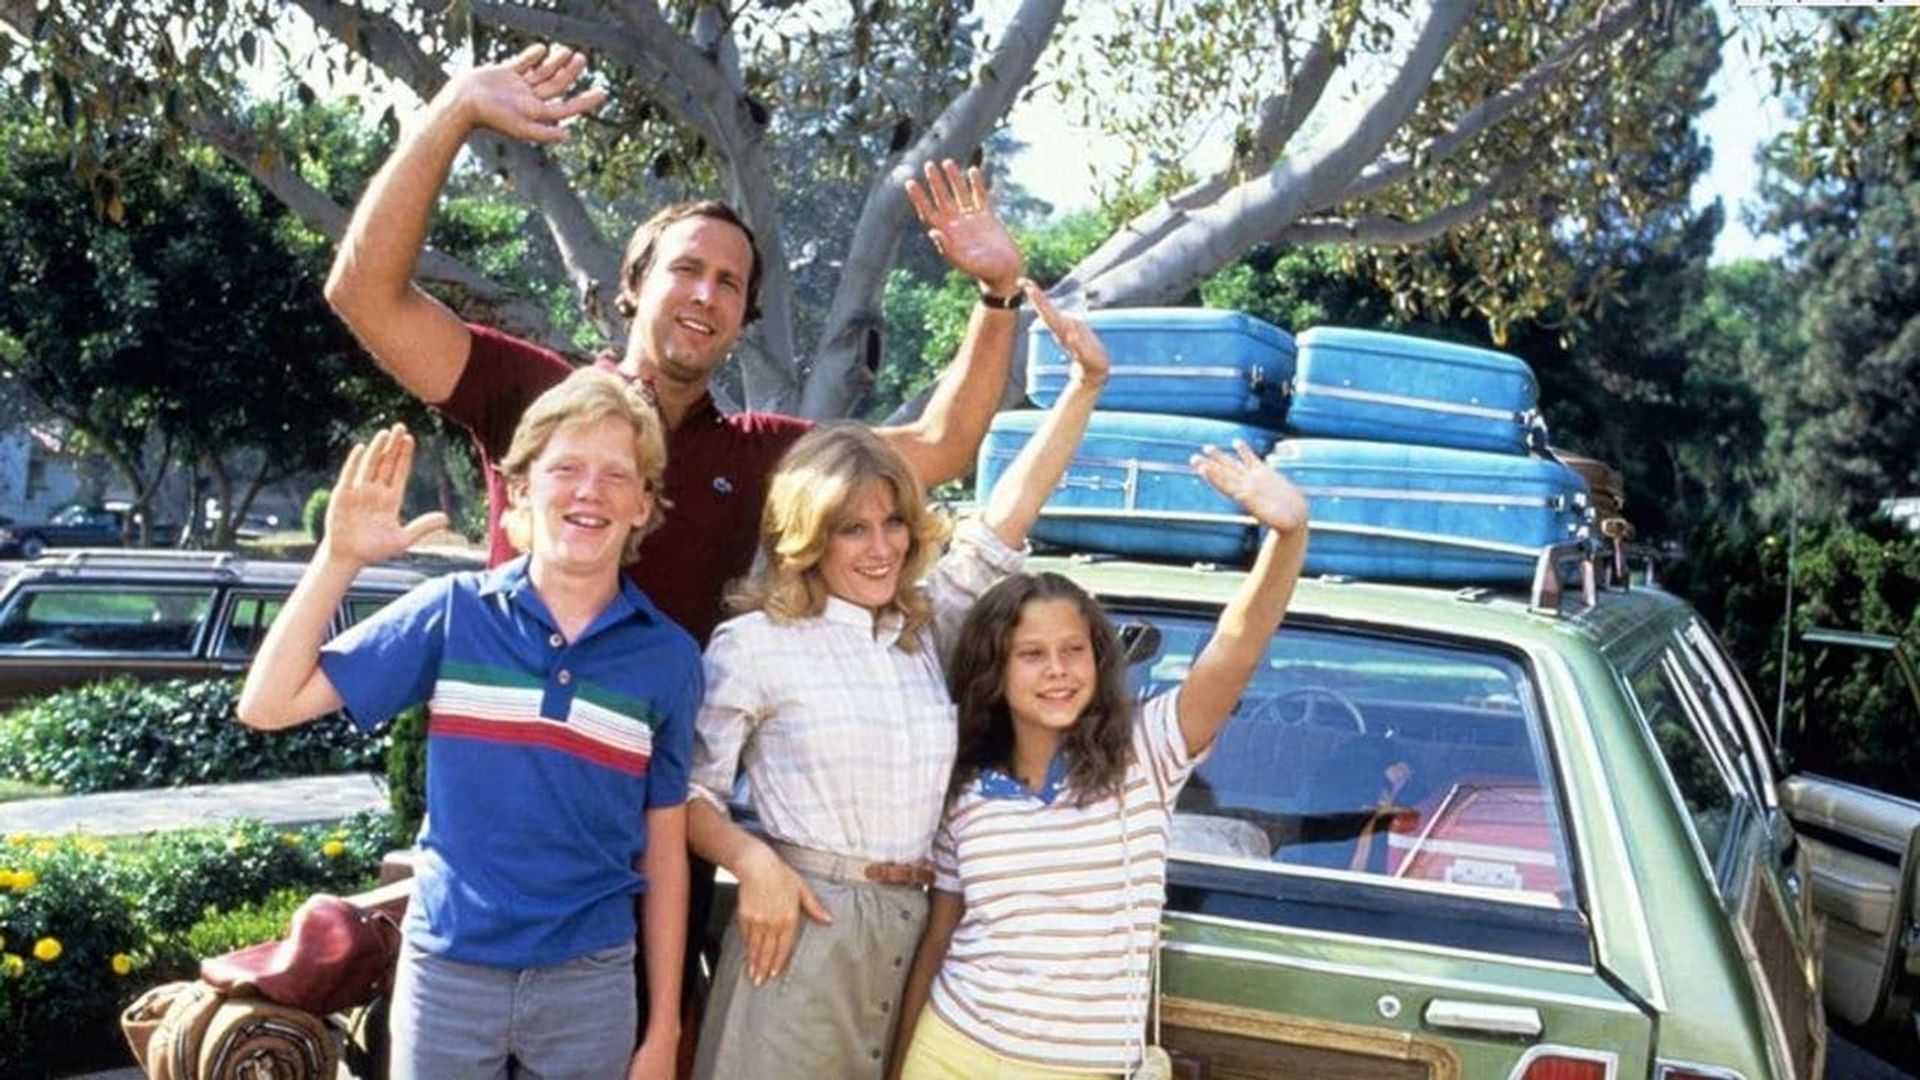 Inside Story: National Lampoon's Vacation background